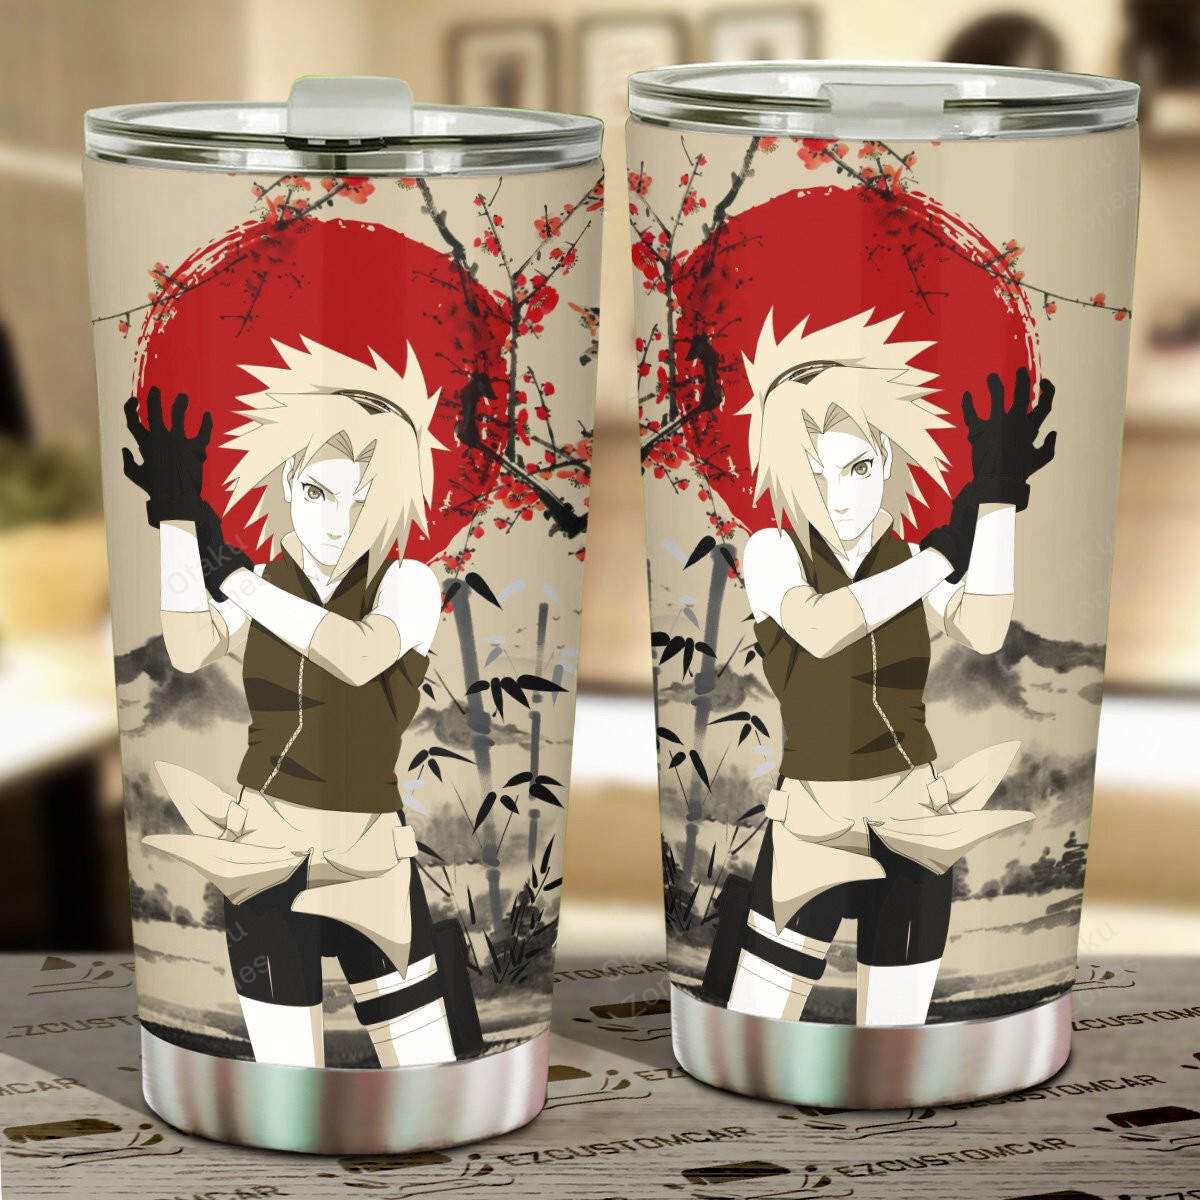 Go ahead and order your new tumbler now! 50